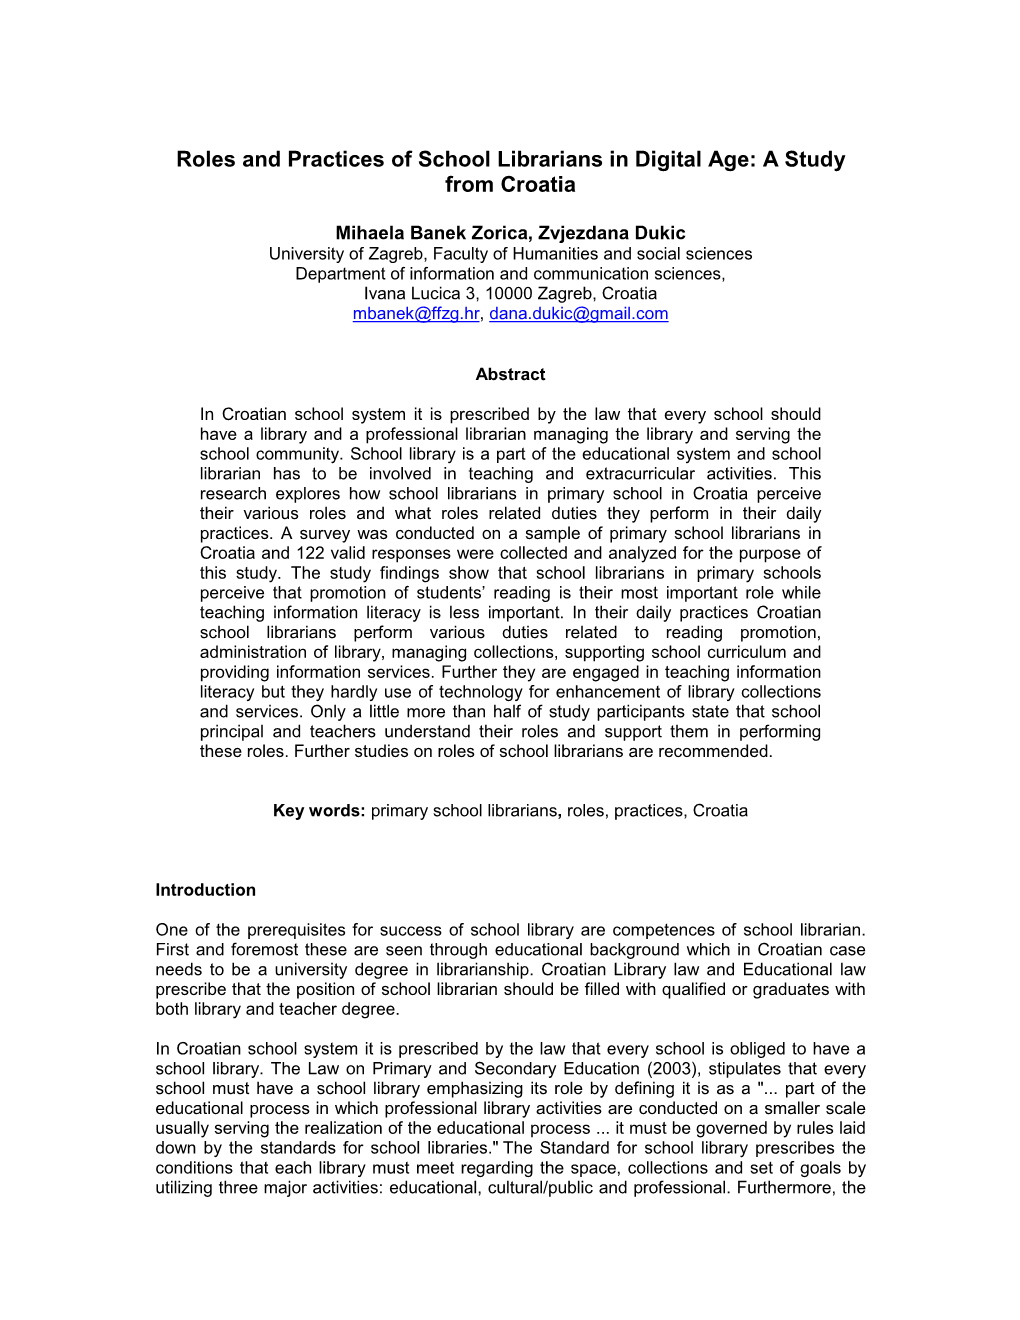 Roles and Practices of School Librarians in Digital Age: a Study from Croatia